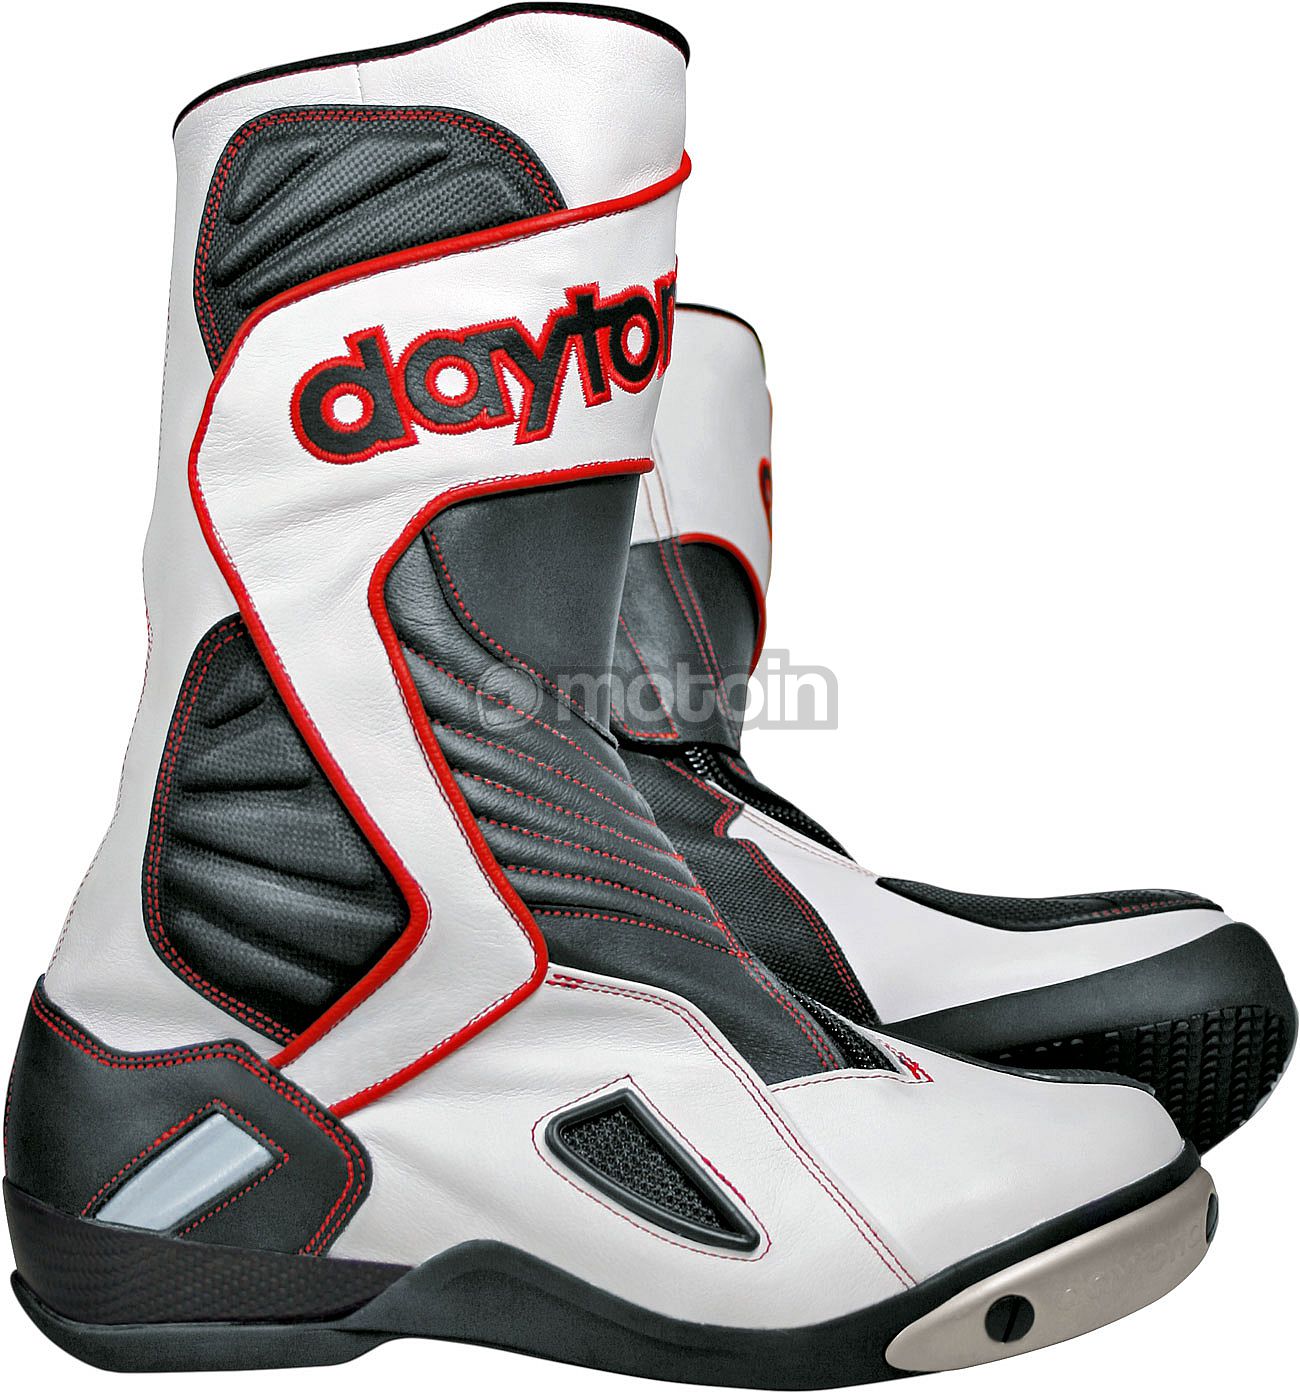 Daytona outer boots for EVO VOLTEX